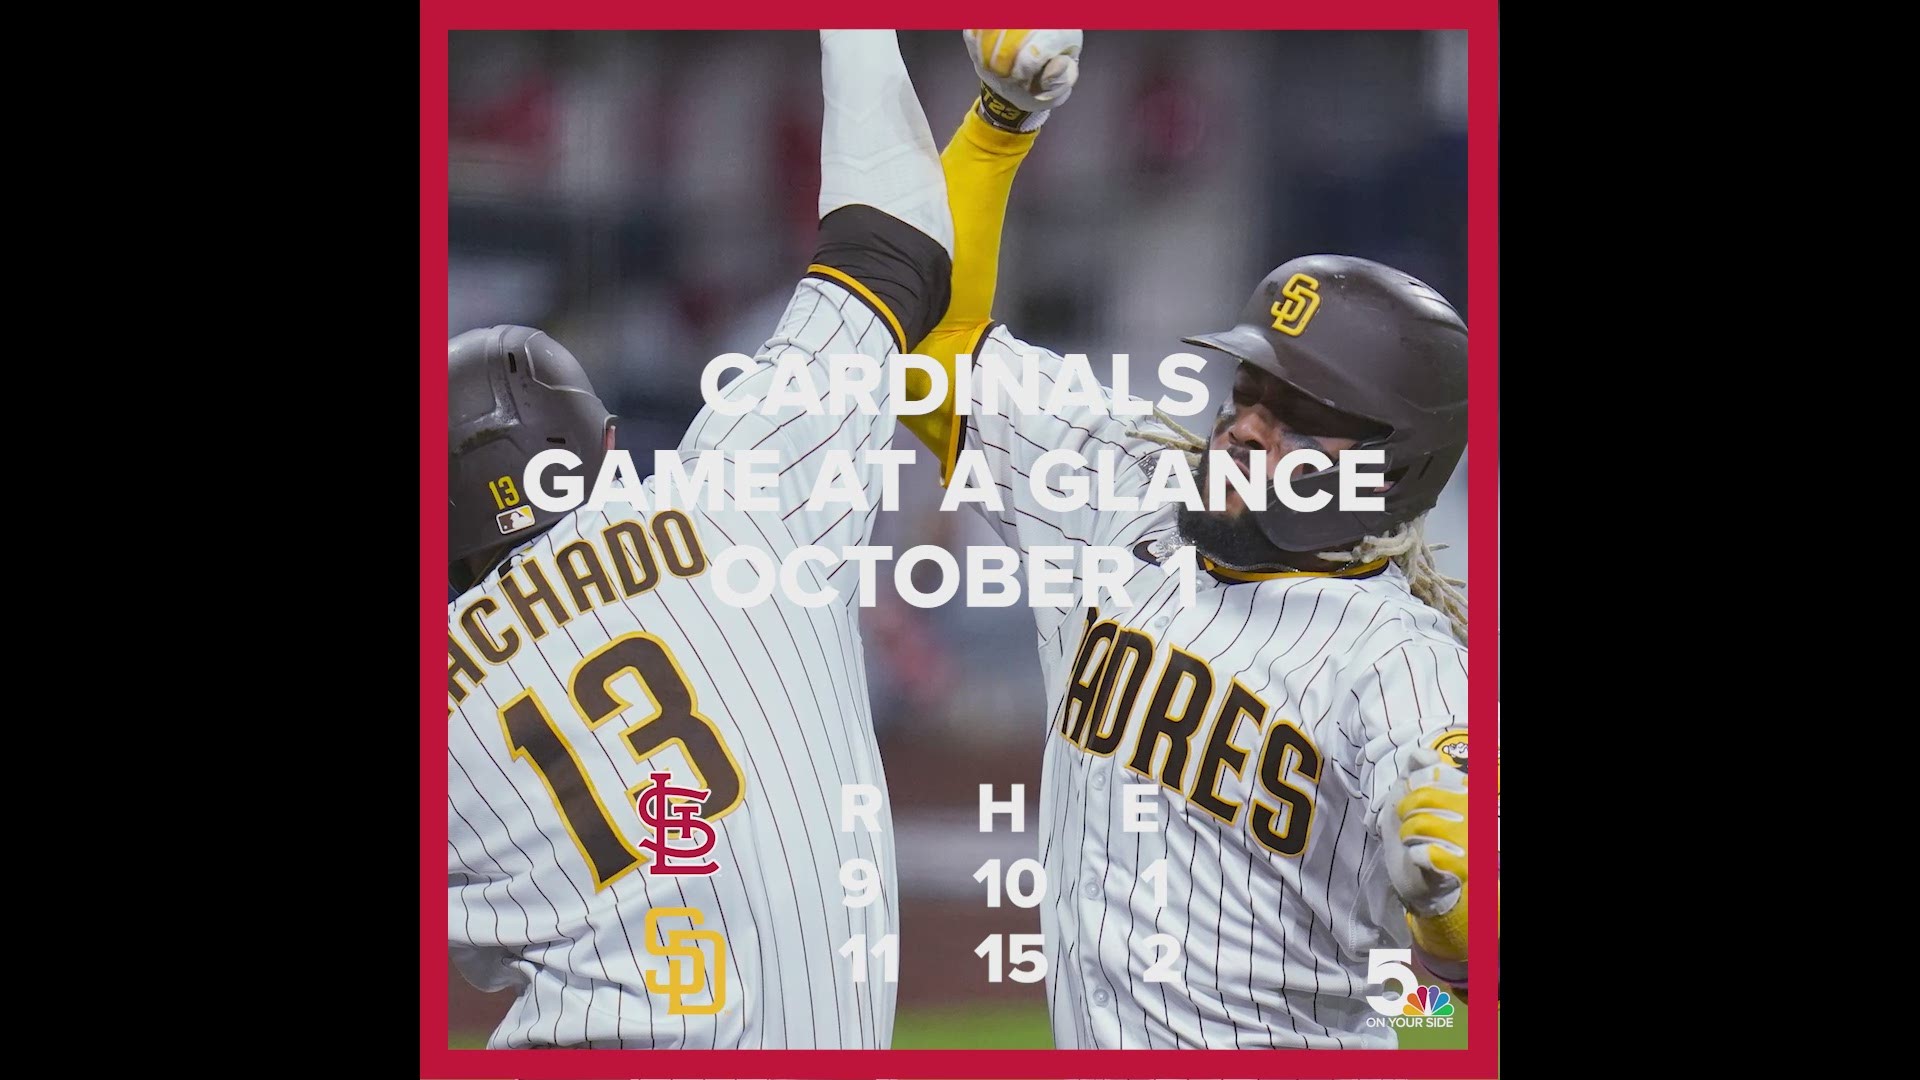 The Cardinals' bullpen couldn't hold on after the offense gave them an early lead in San Diego